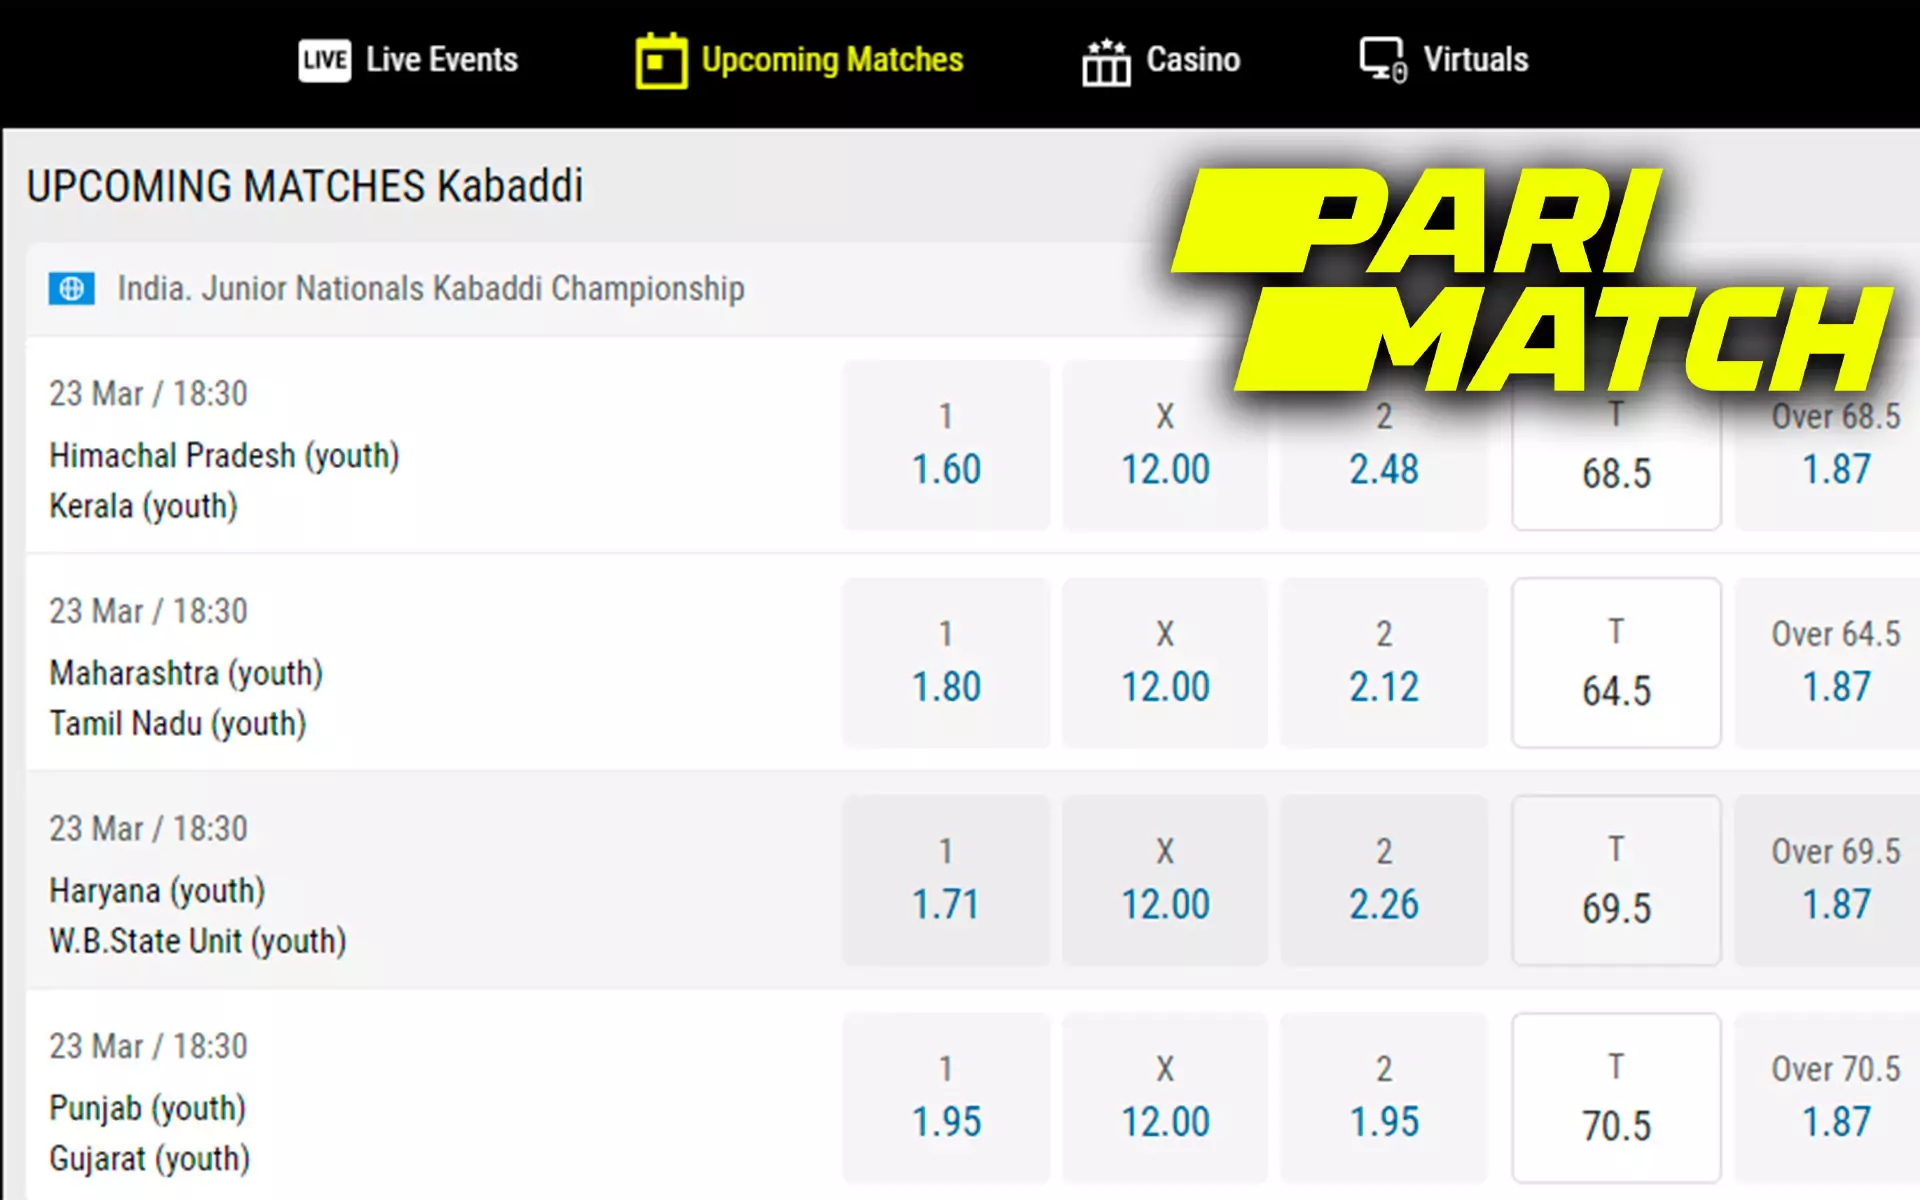 You can choose kabaddi, football, tennis, basketball and any other sport to bet on at Parimatch.